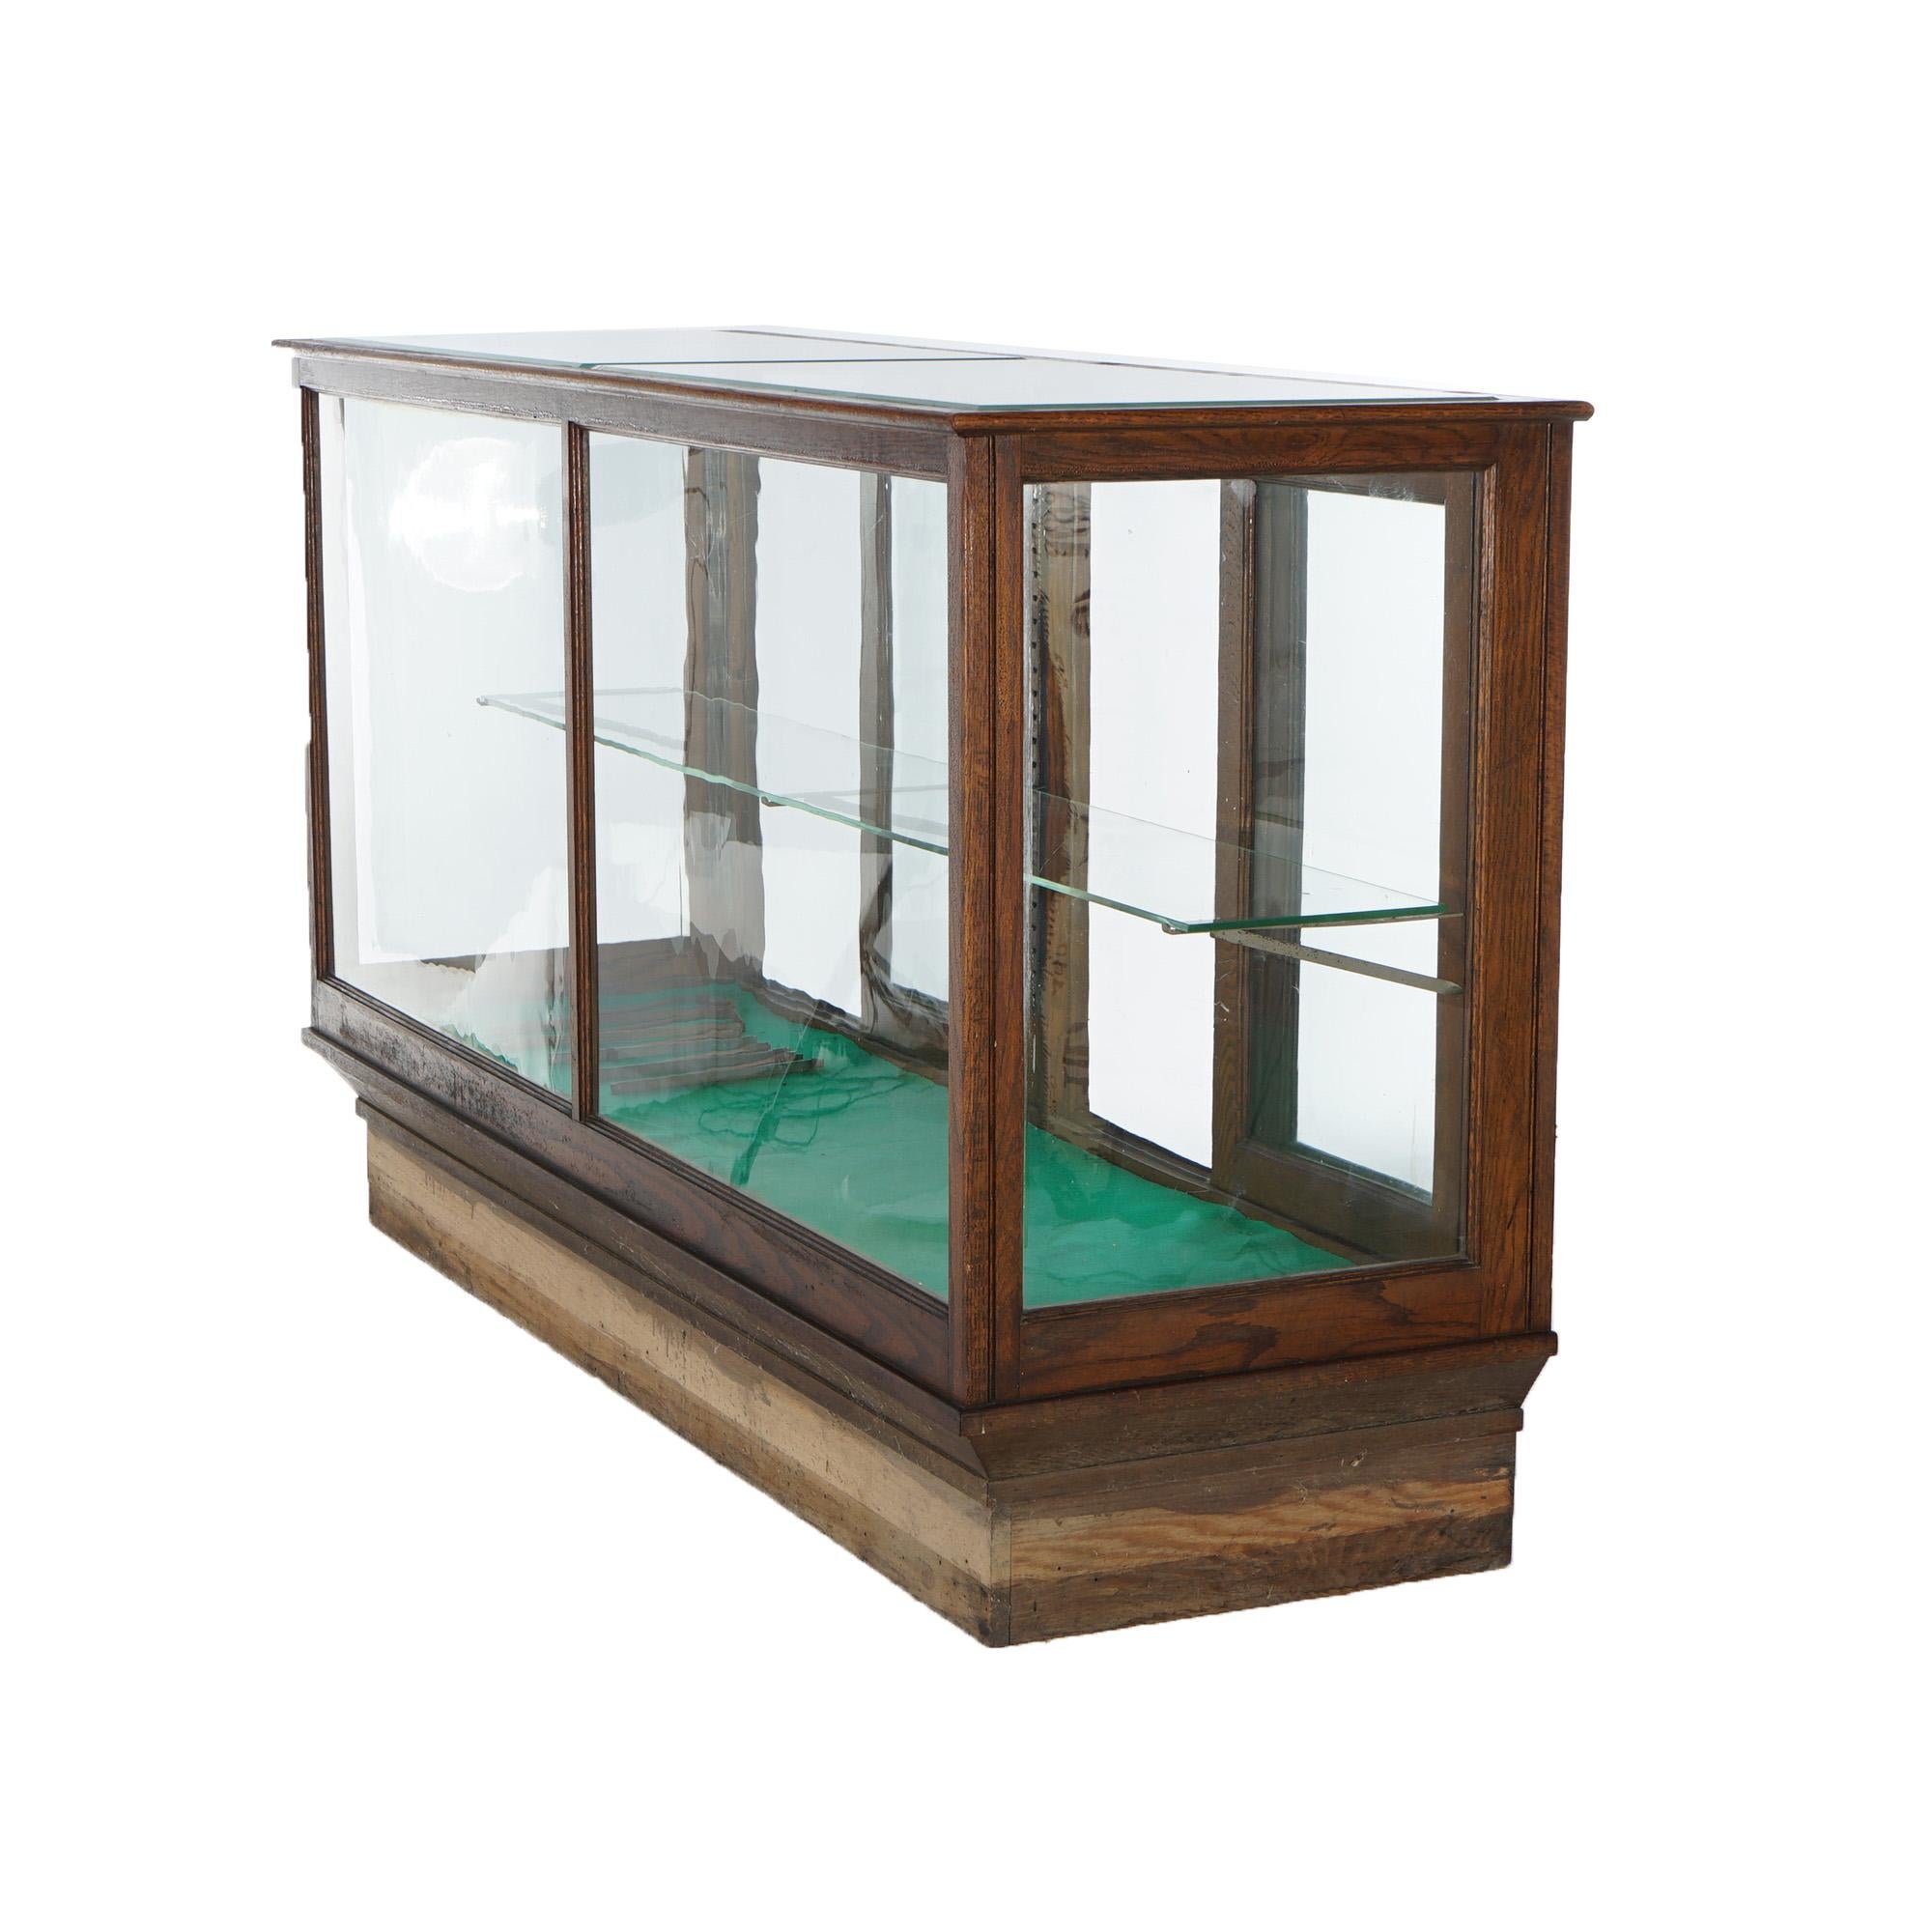 Glass Antique Oak Country Store Display Case, Floor Model, Signed Saginaw, c1920